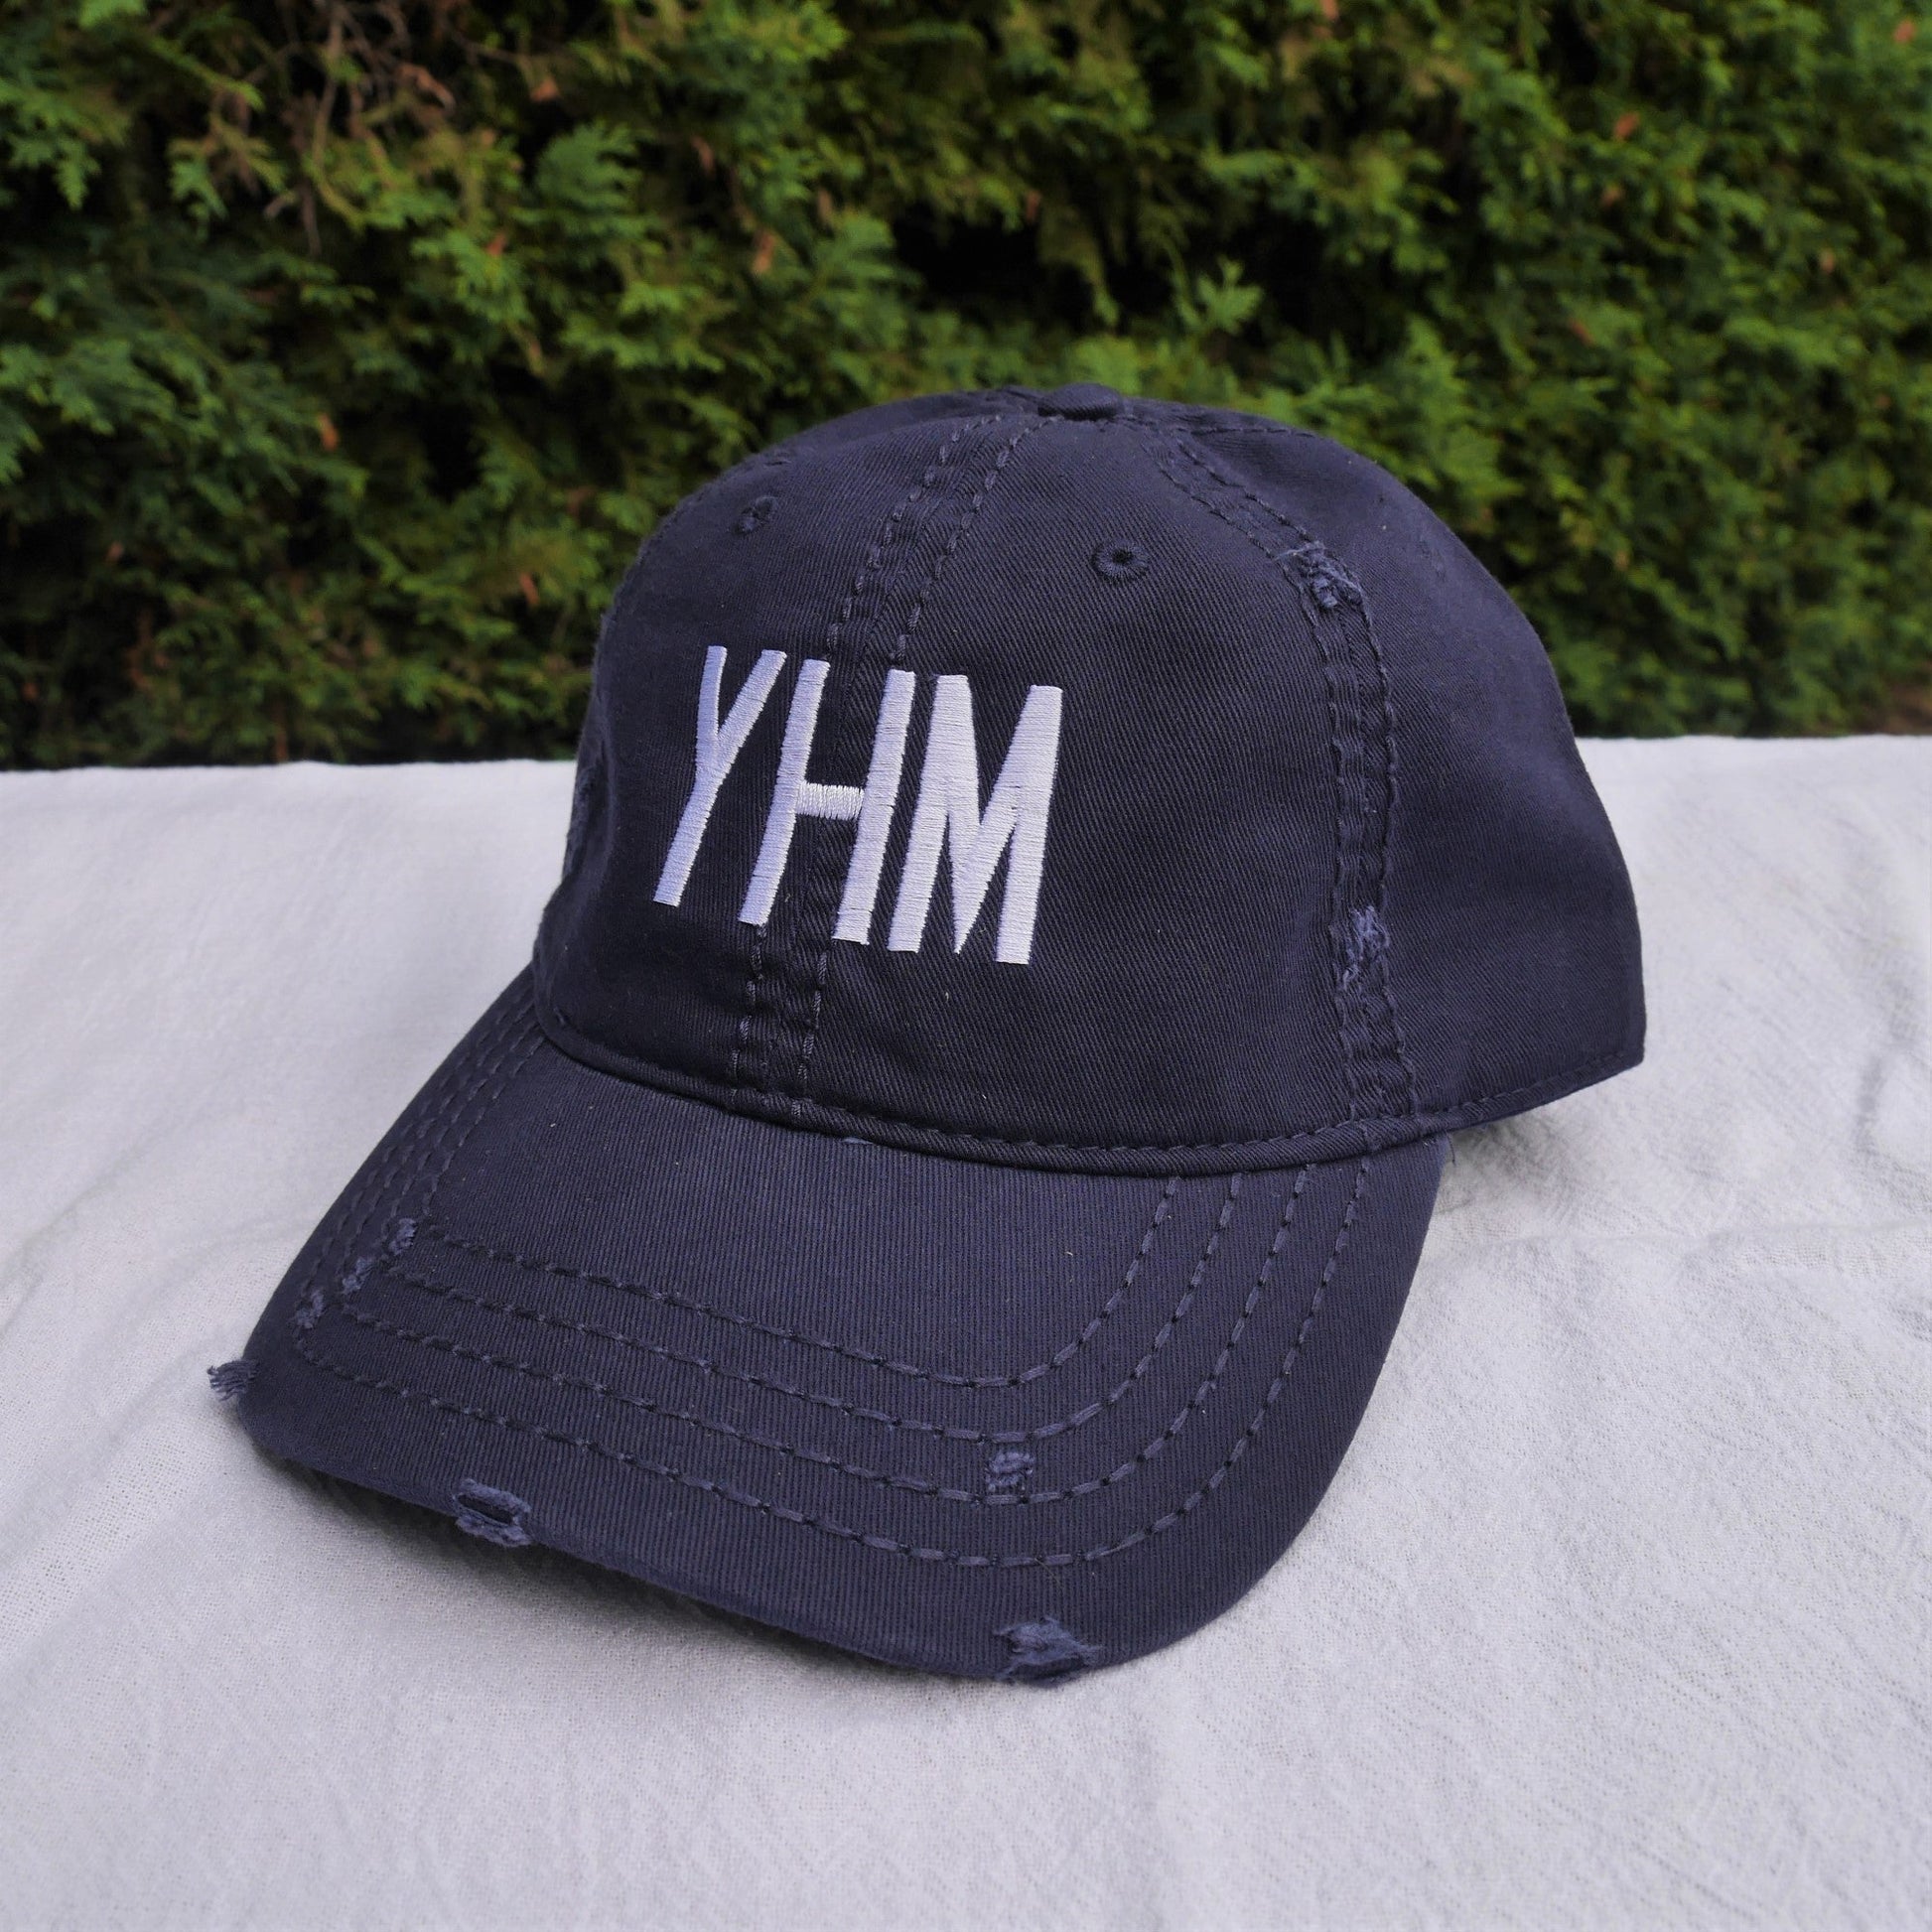 Airport Code Kid's Baseball Cap - White • YQY Sydney • YHM Designs - Image 37